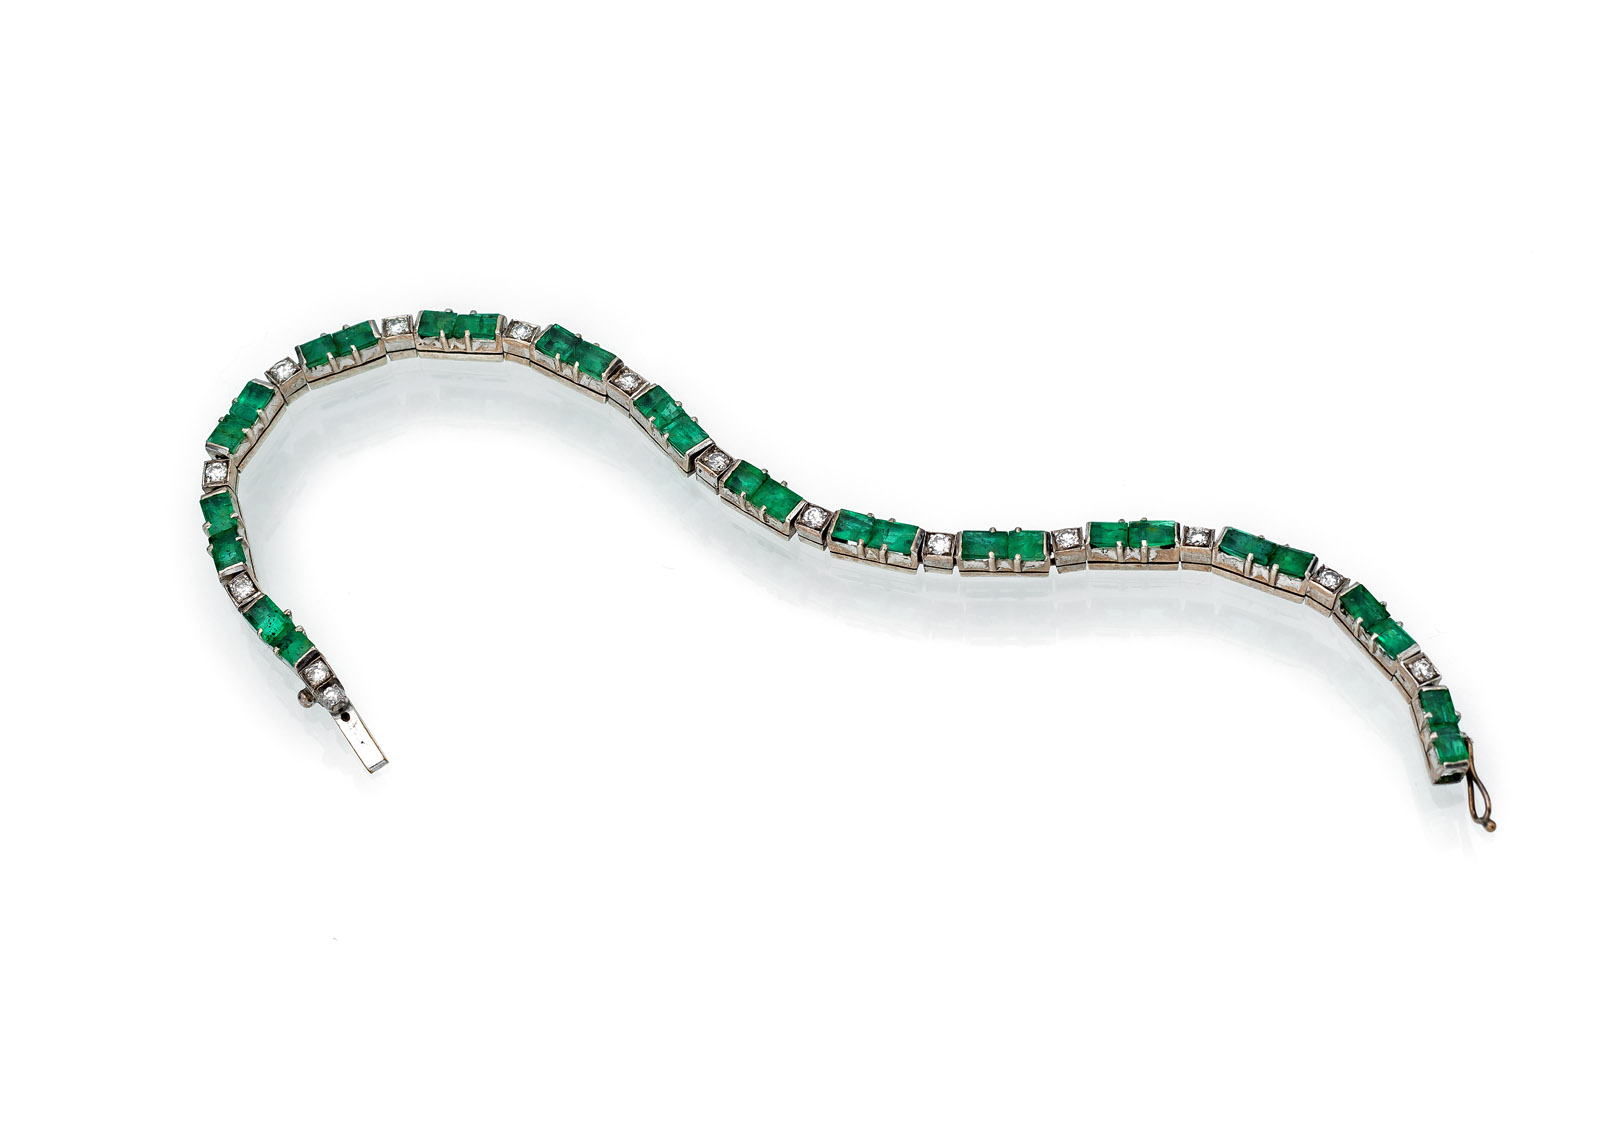 Silver, set with 28 baguette-cut emeralds (tog.ca. 4,2 ct.), and 14 diamonds (tog.ca. 0,7 ct.). Circa 11,4 g. 3-4 emeralds damaged